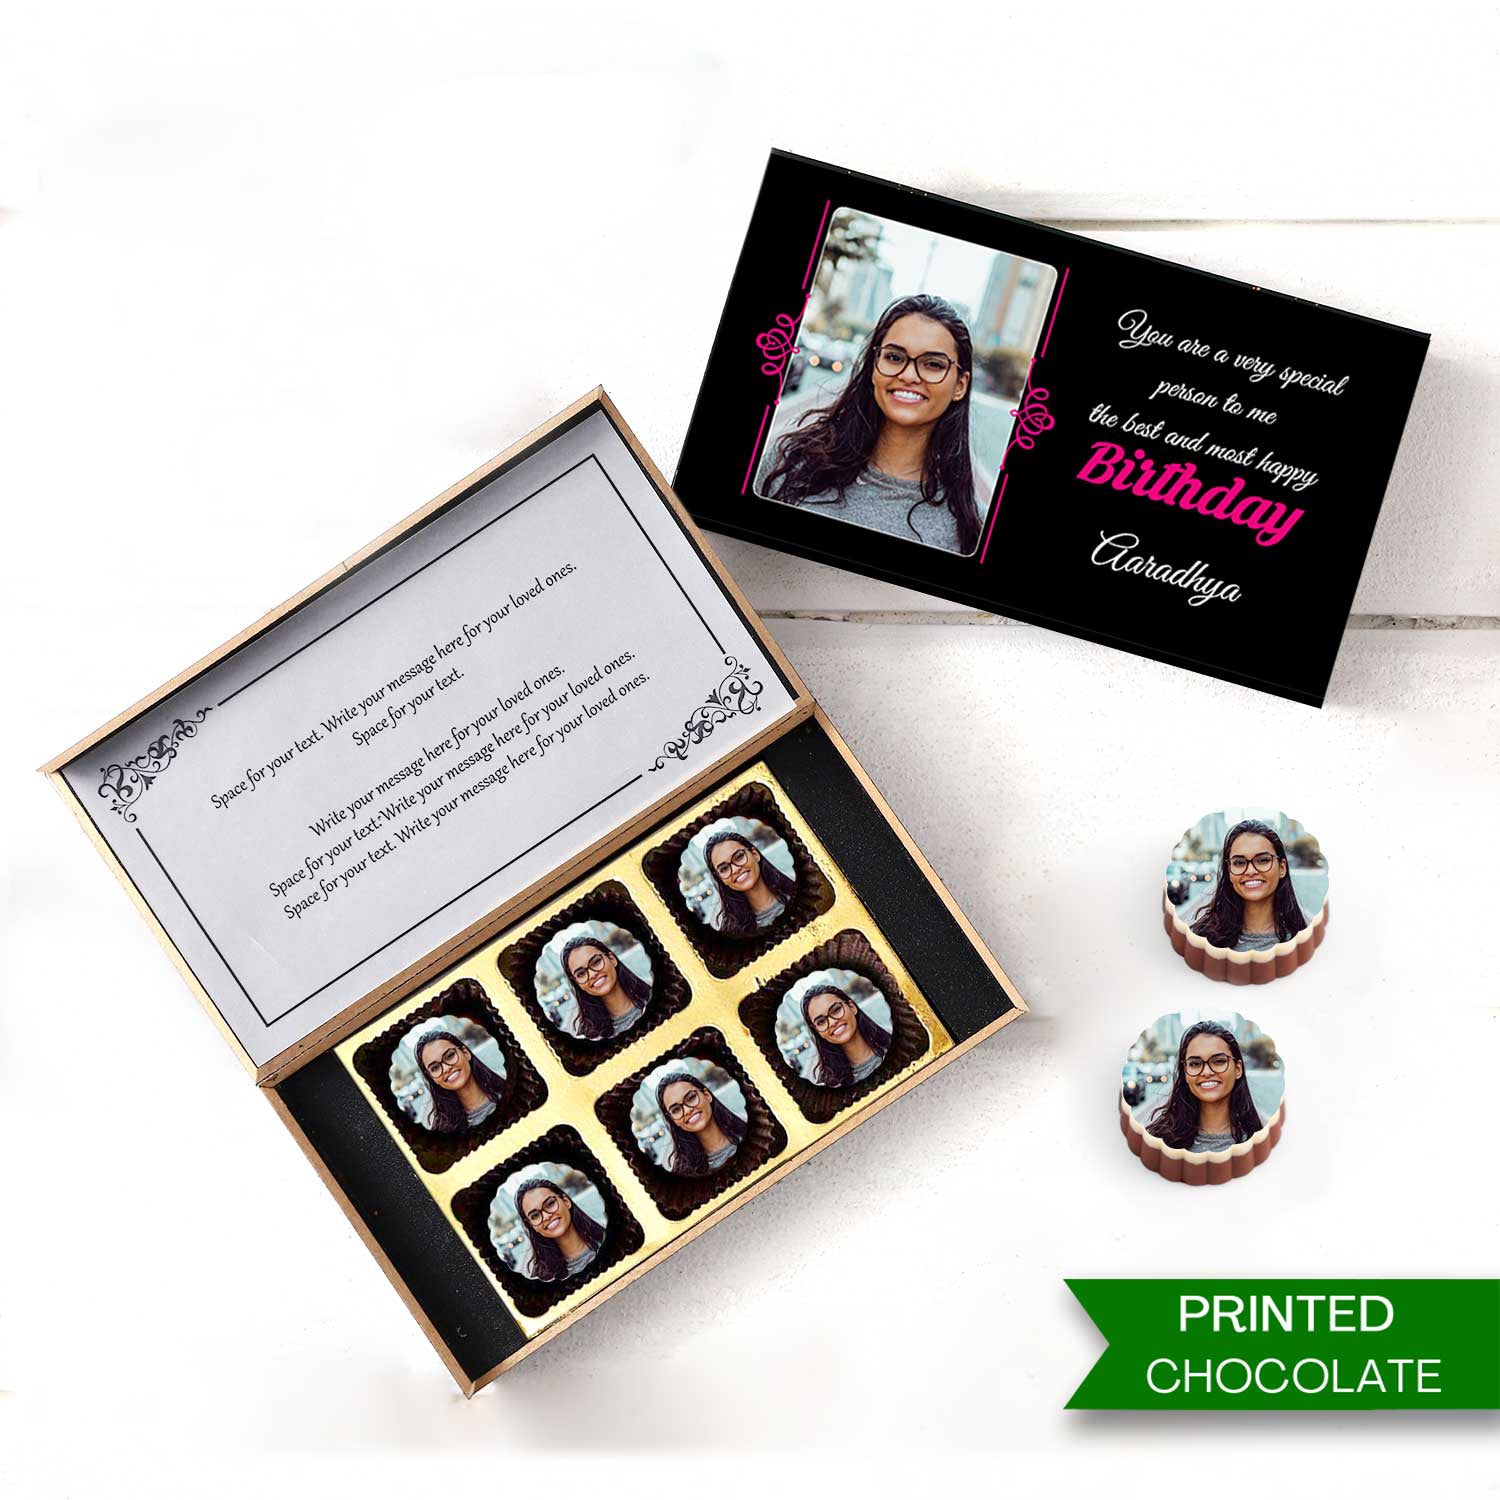 Customized Gift For Personal or Professional Usage